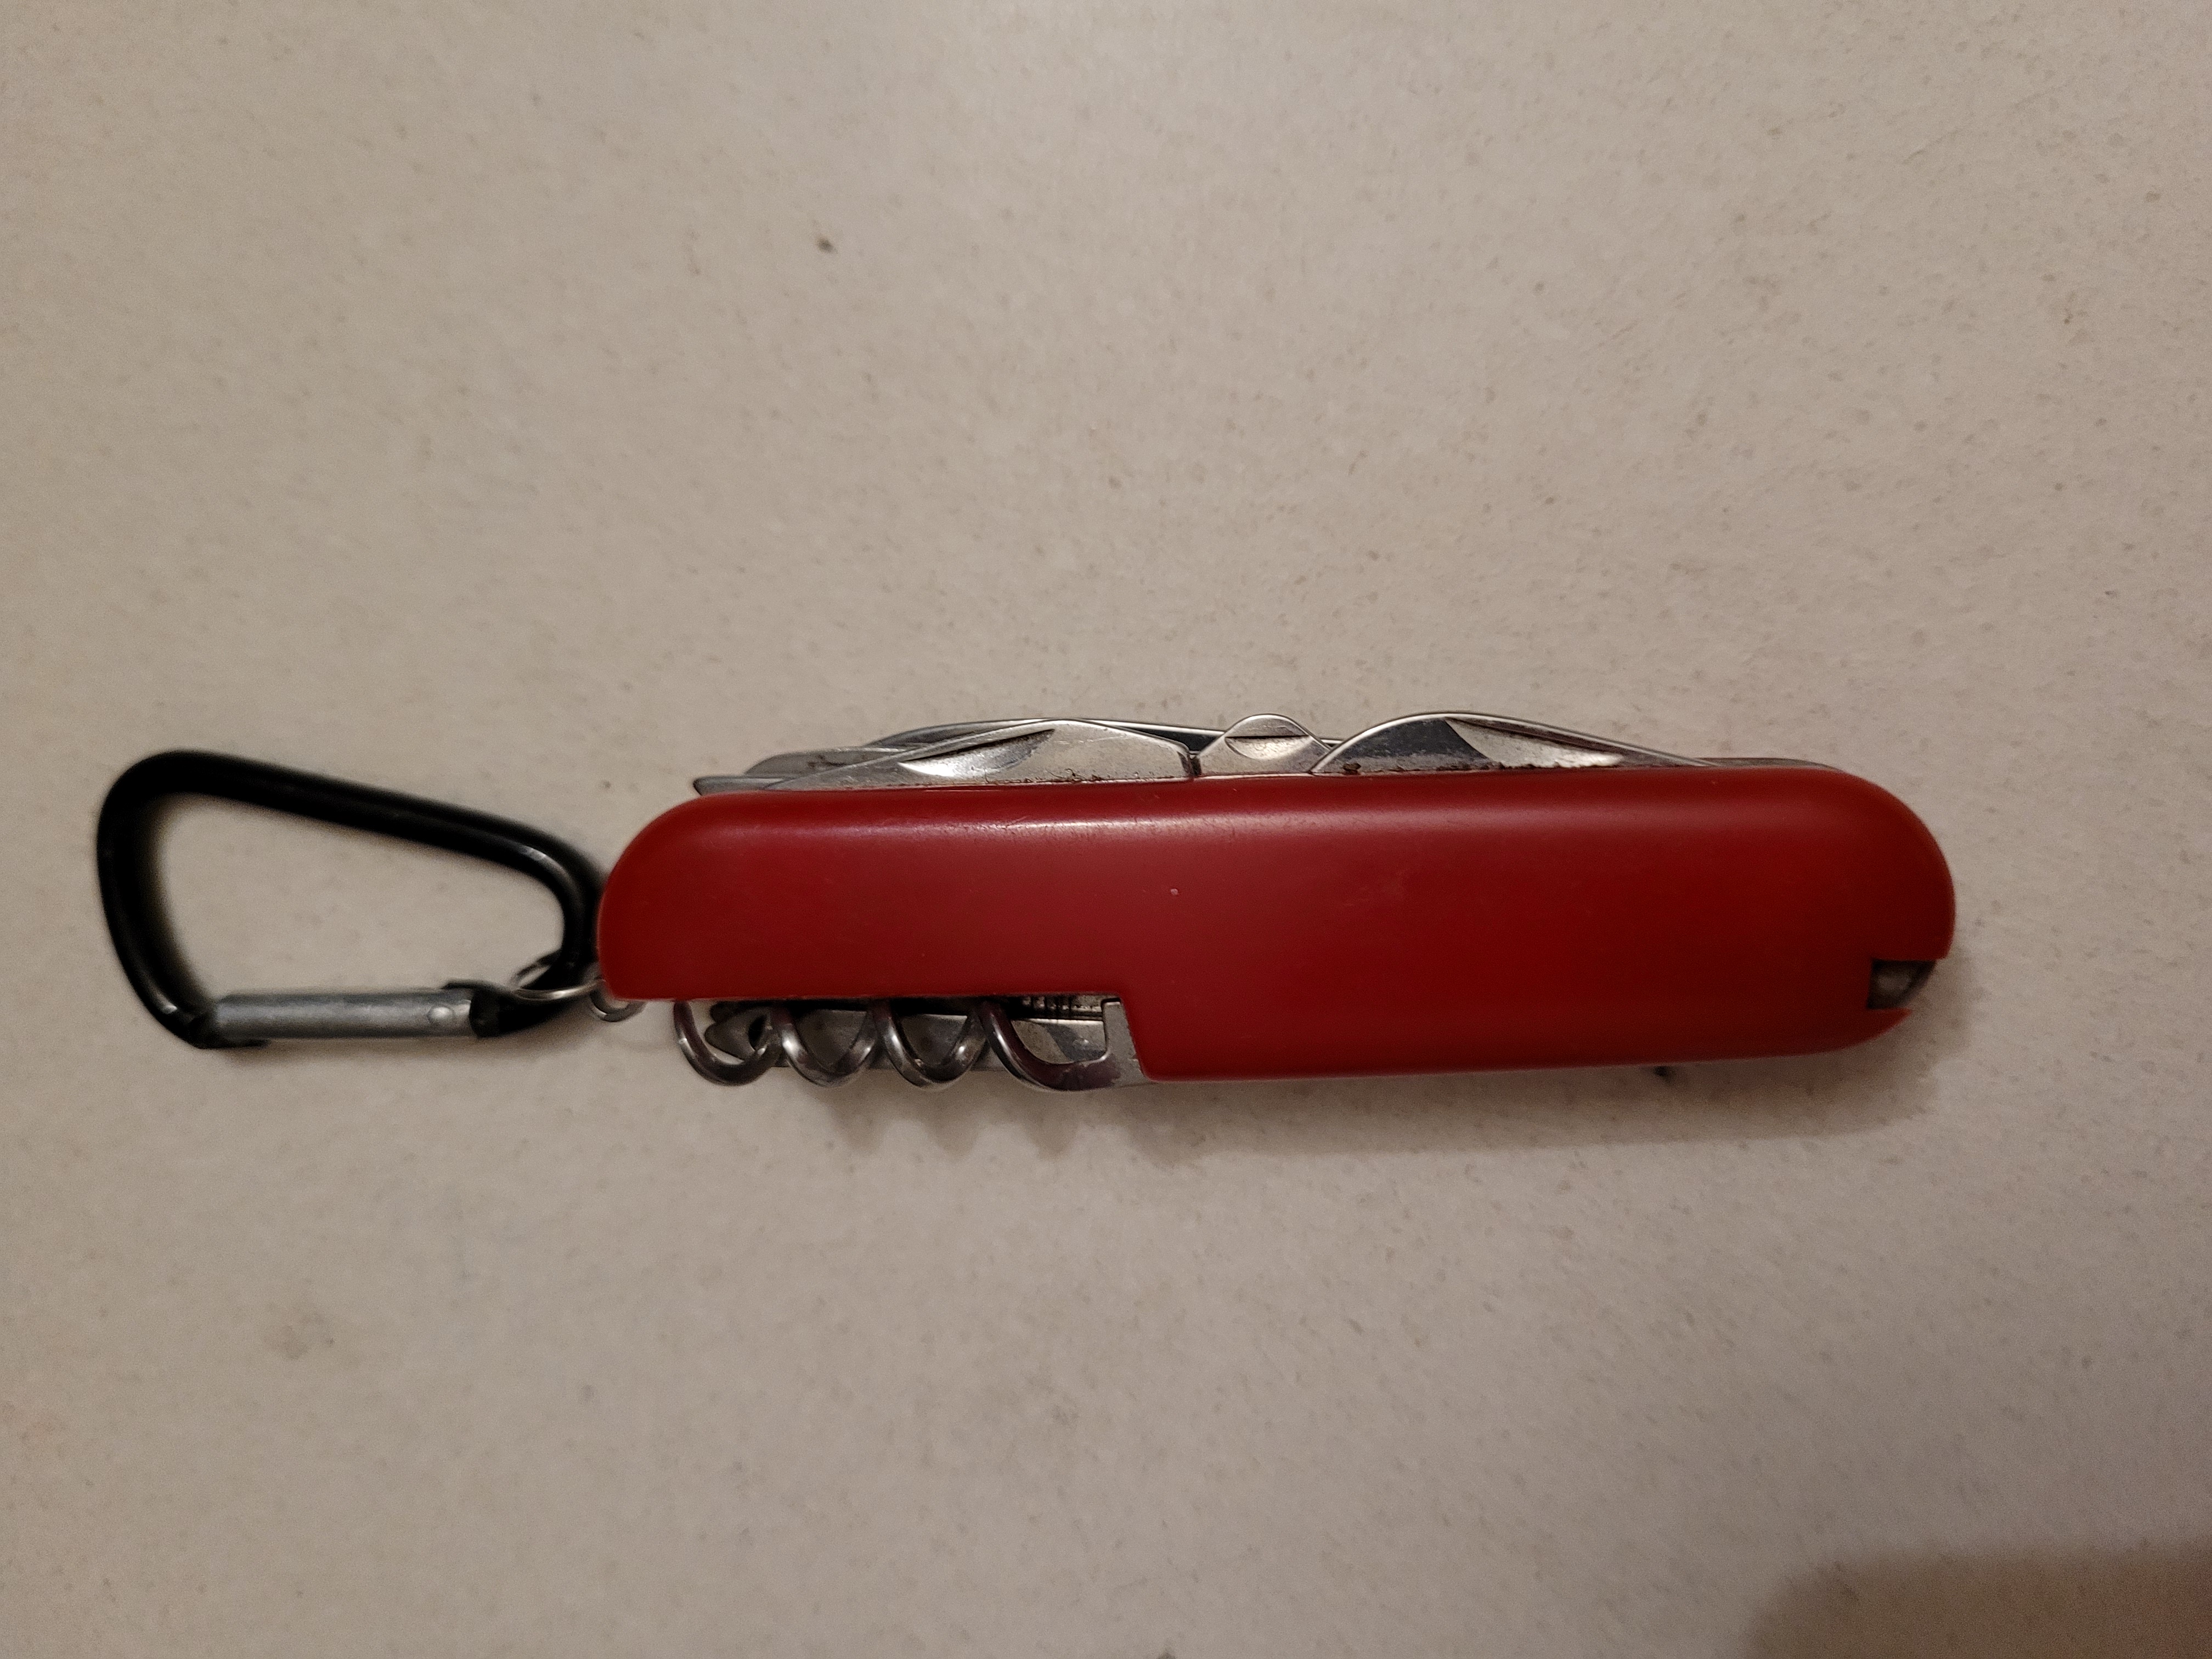 pocket knife with metal clip attached